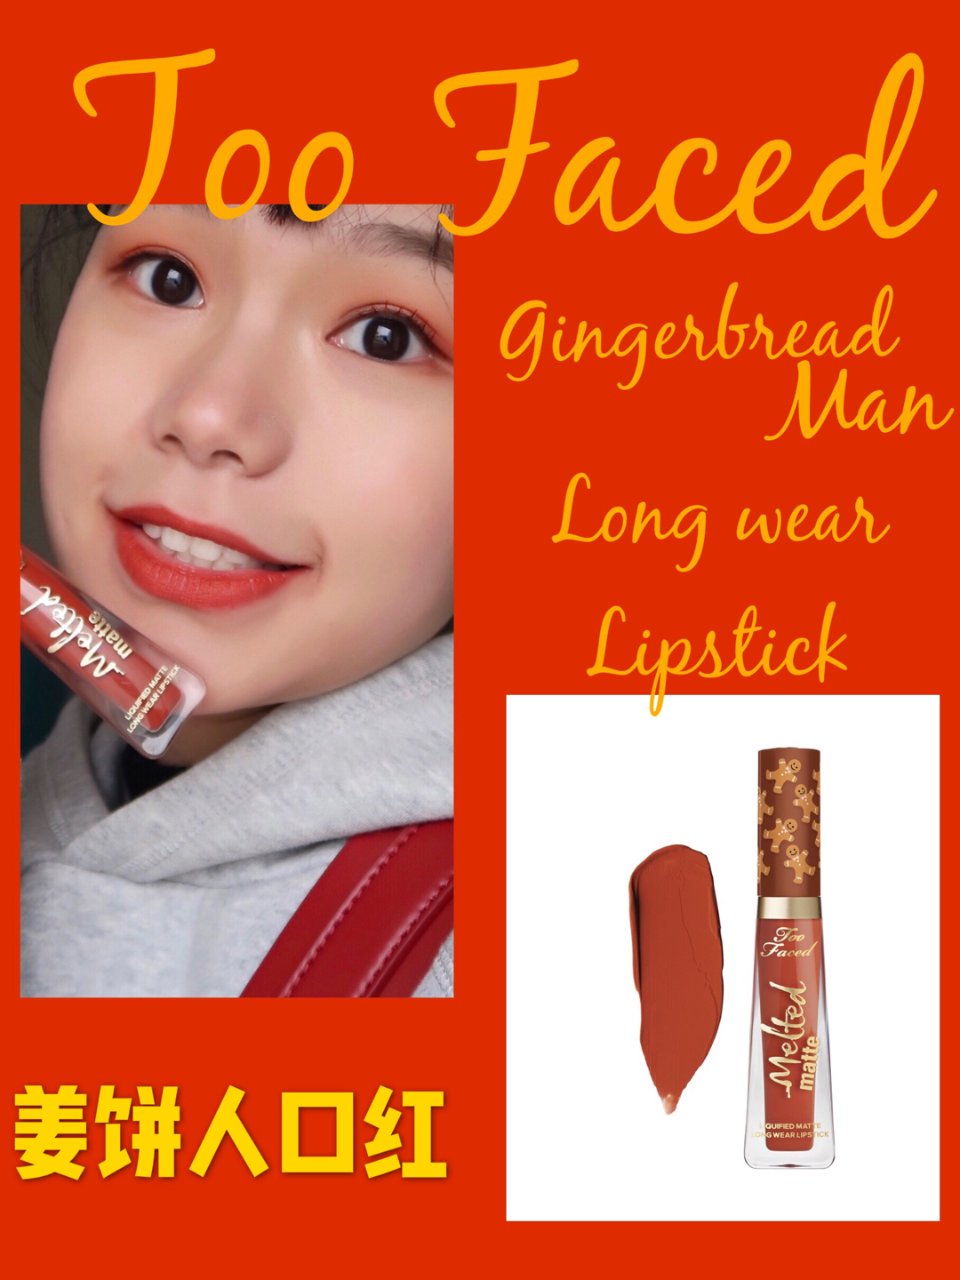 Too Faced,Gingerbread man lipstick